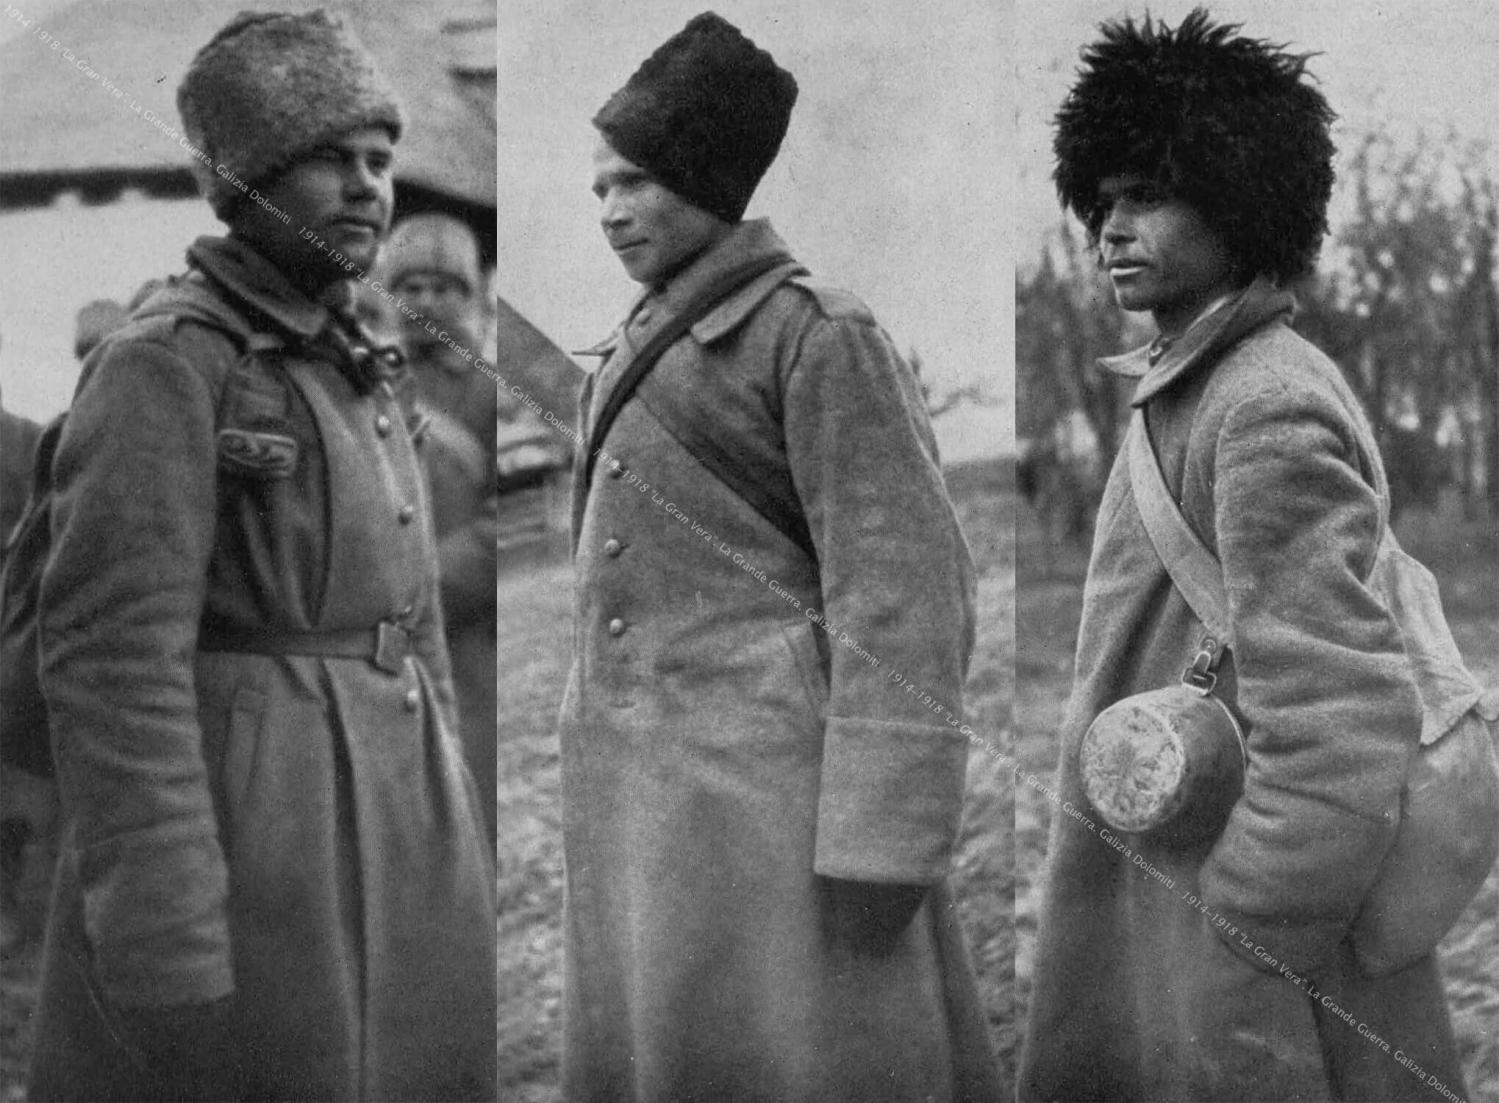 Types of Russian fighters of the Cossack division, recognisable by their typical fur hats